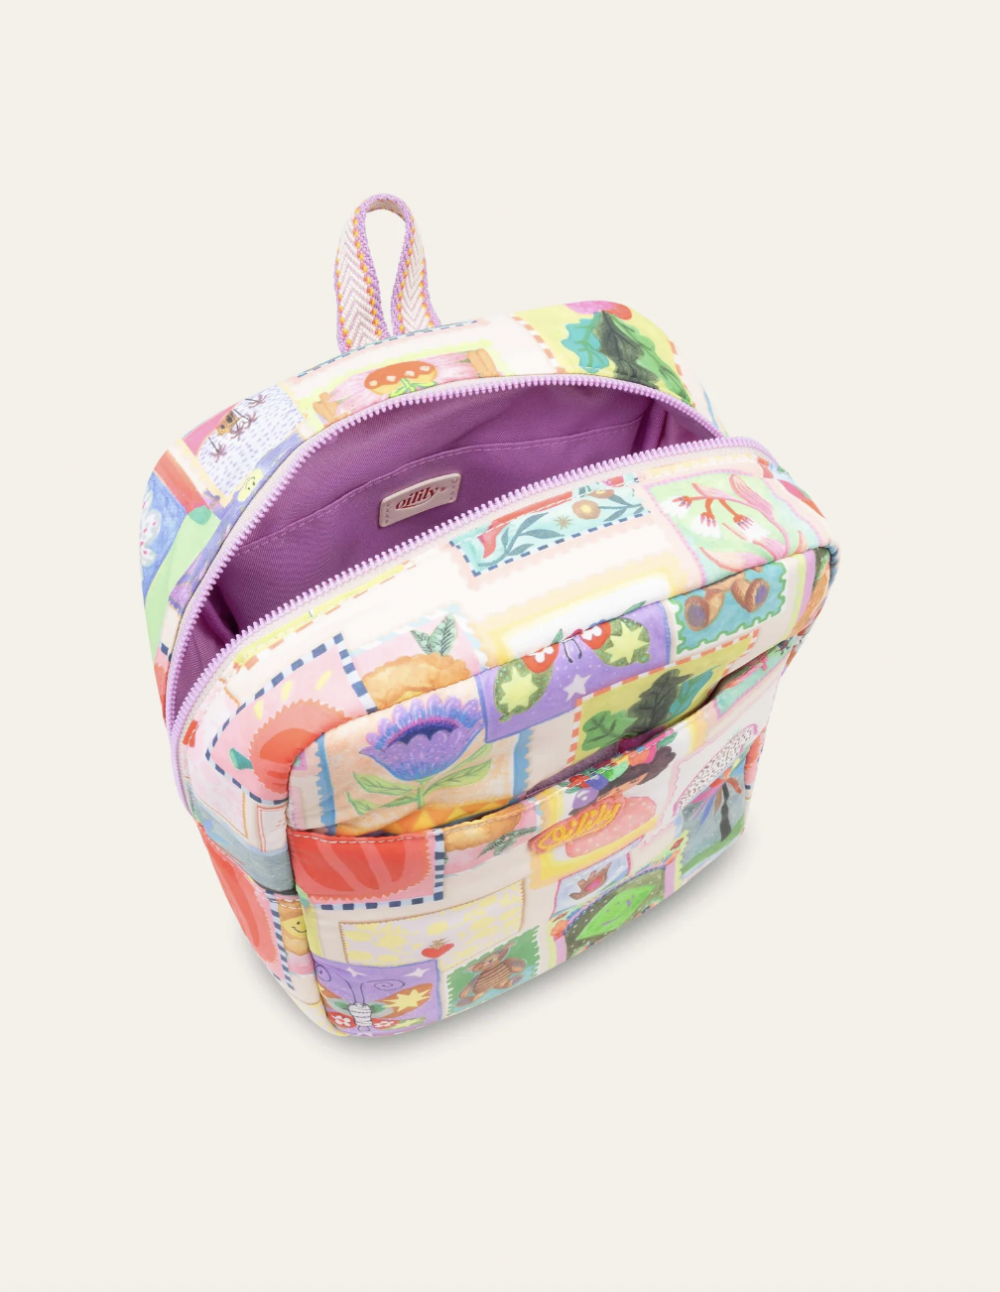 OILILY Bobby backpack